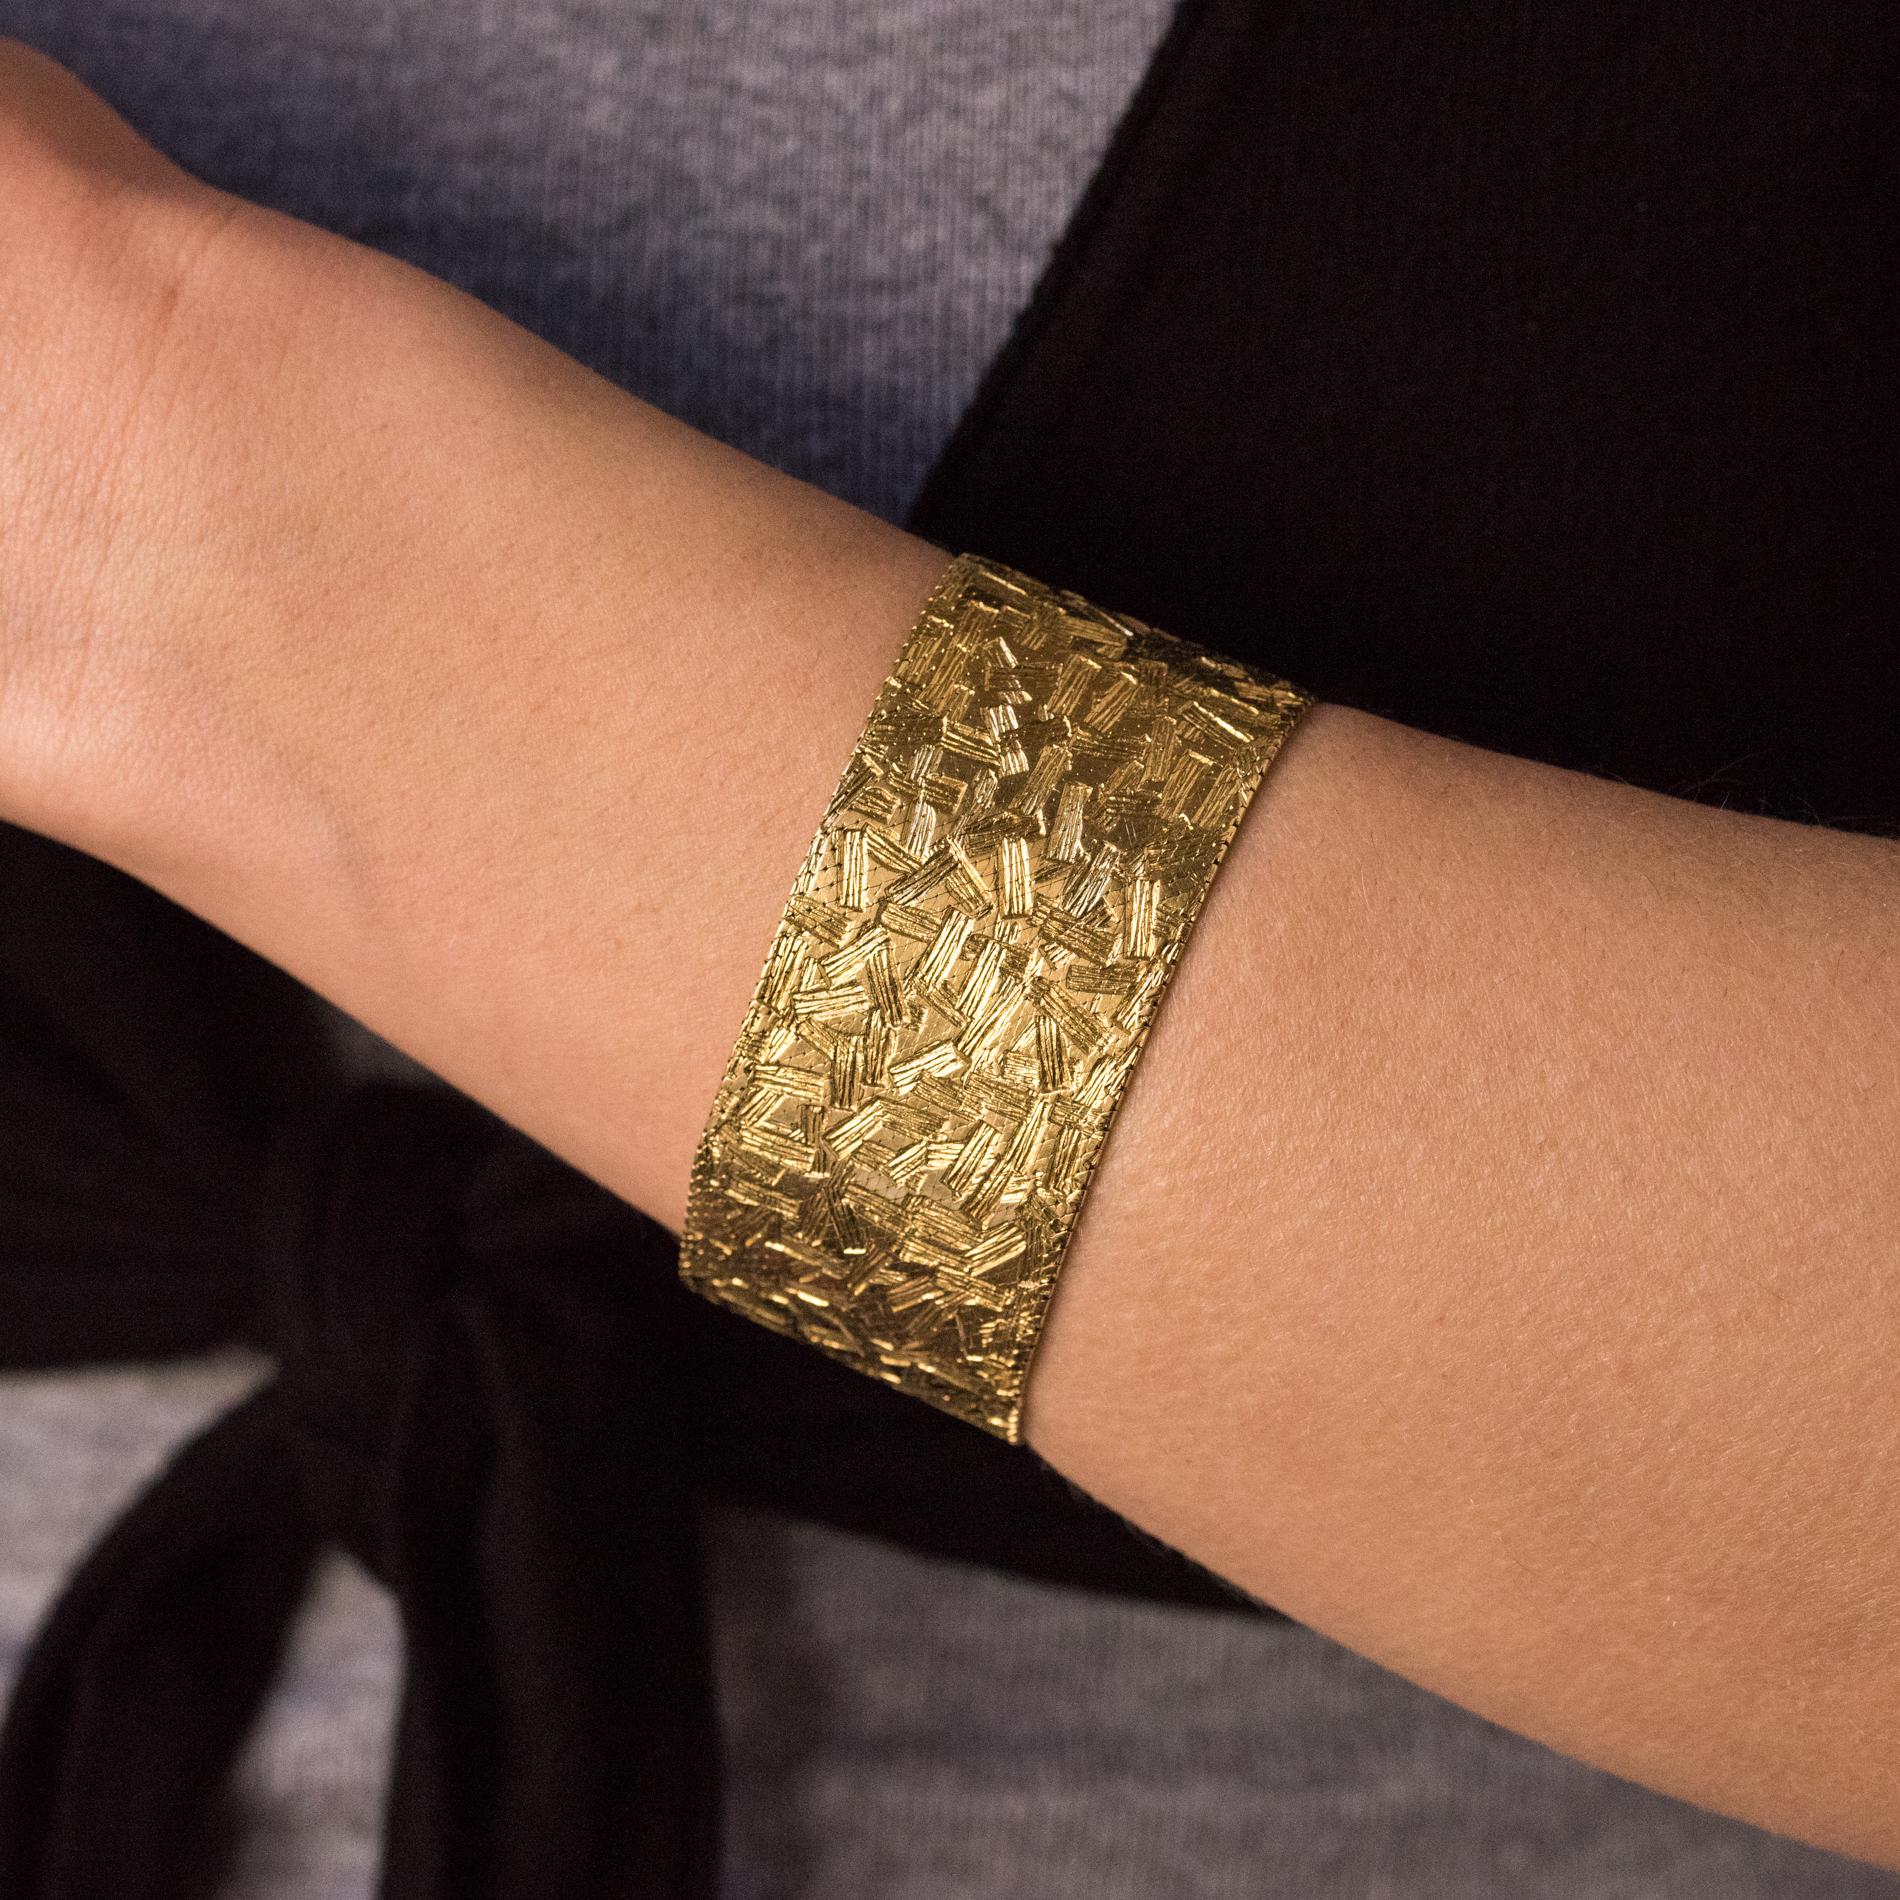 Bracelet in 18 karats yellow and white gold, weevil hallmark.
This beautiful retro bracelet is made of a Milanese fabric mesh with patterns. The clasp is ratchet with 2 safety 